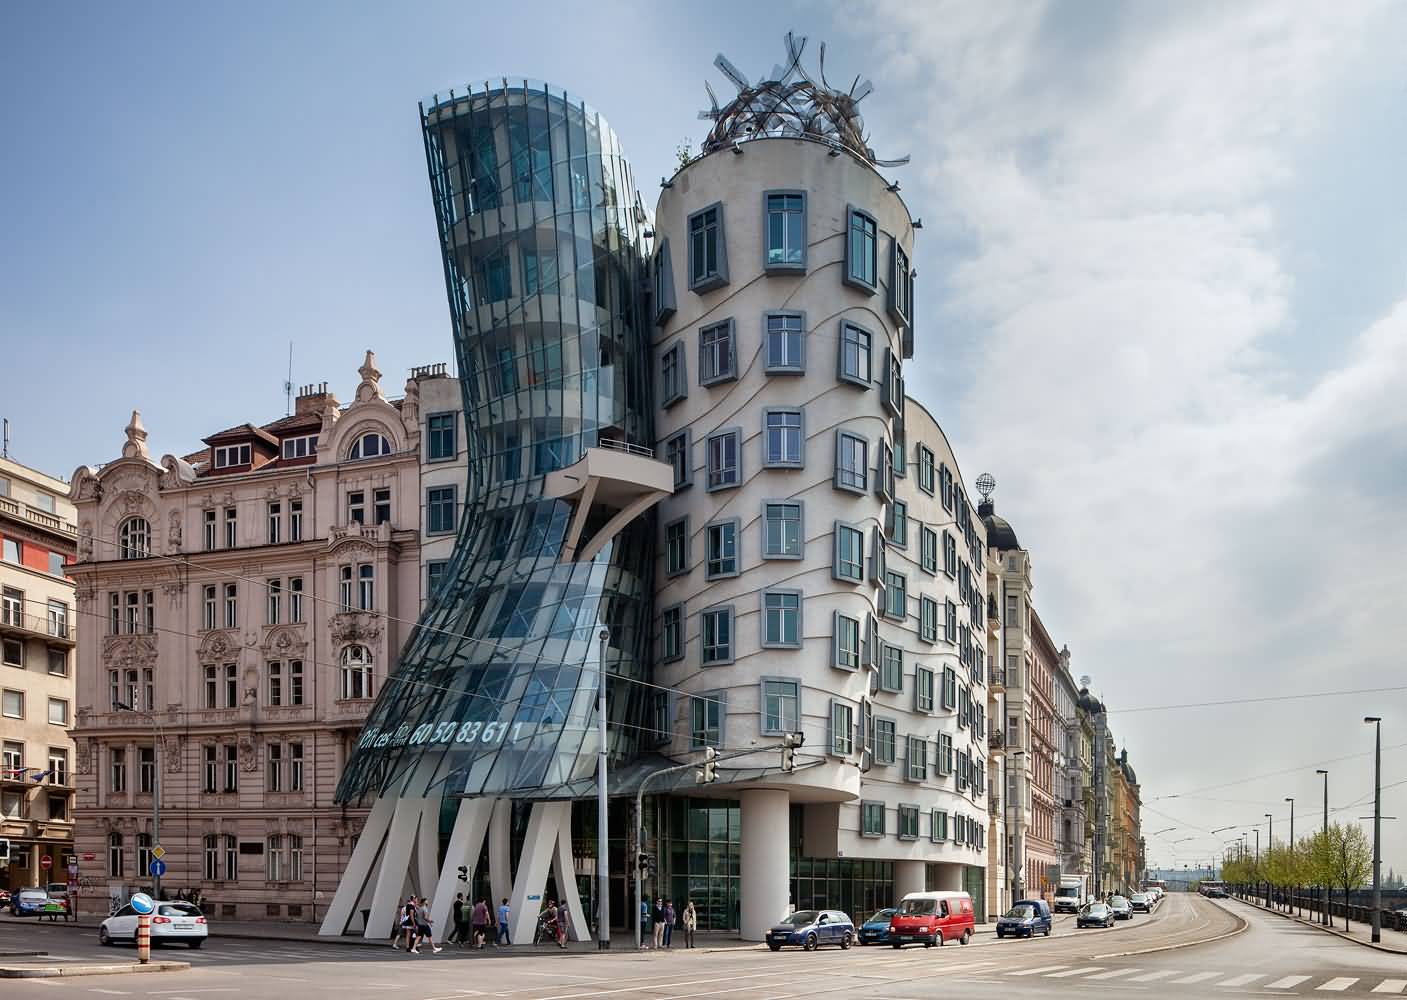 The Dancing House View